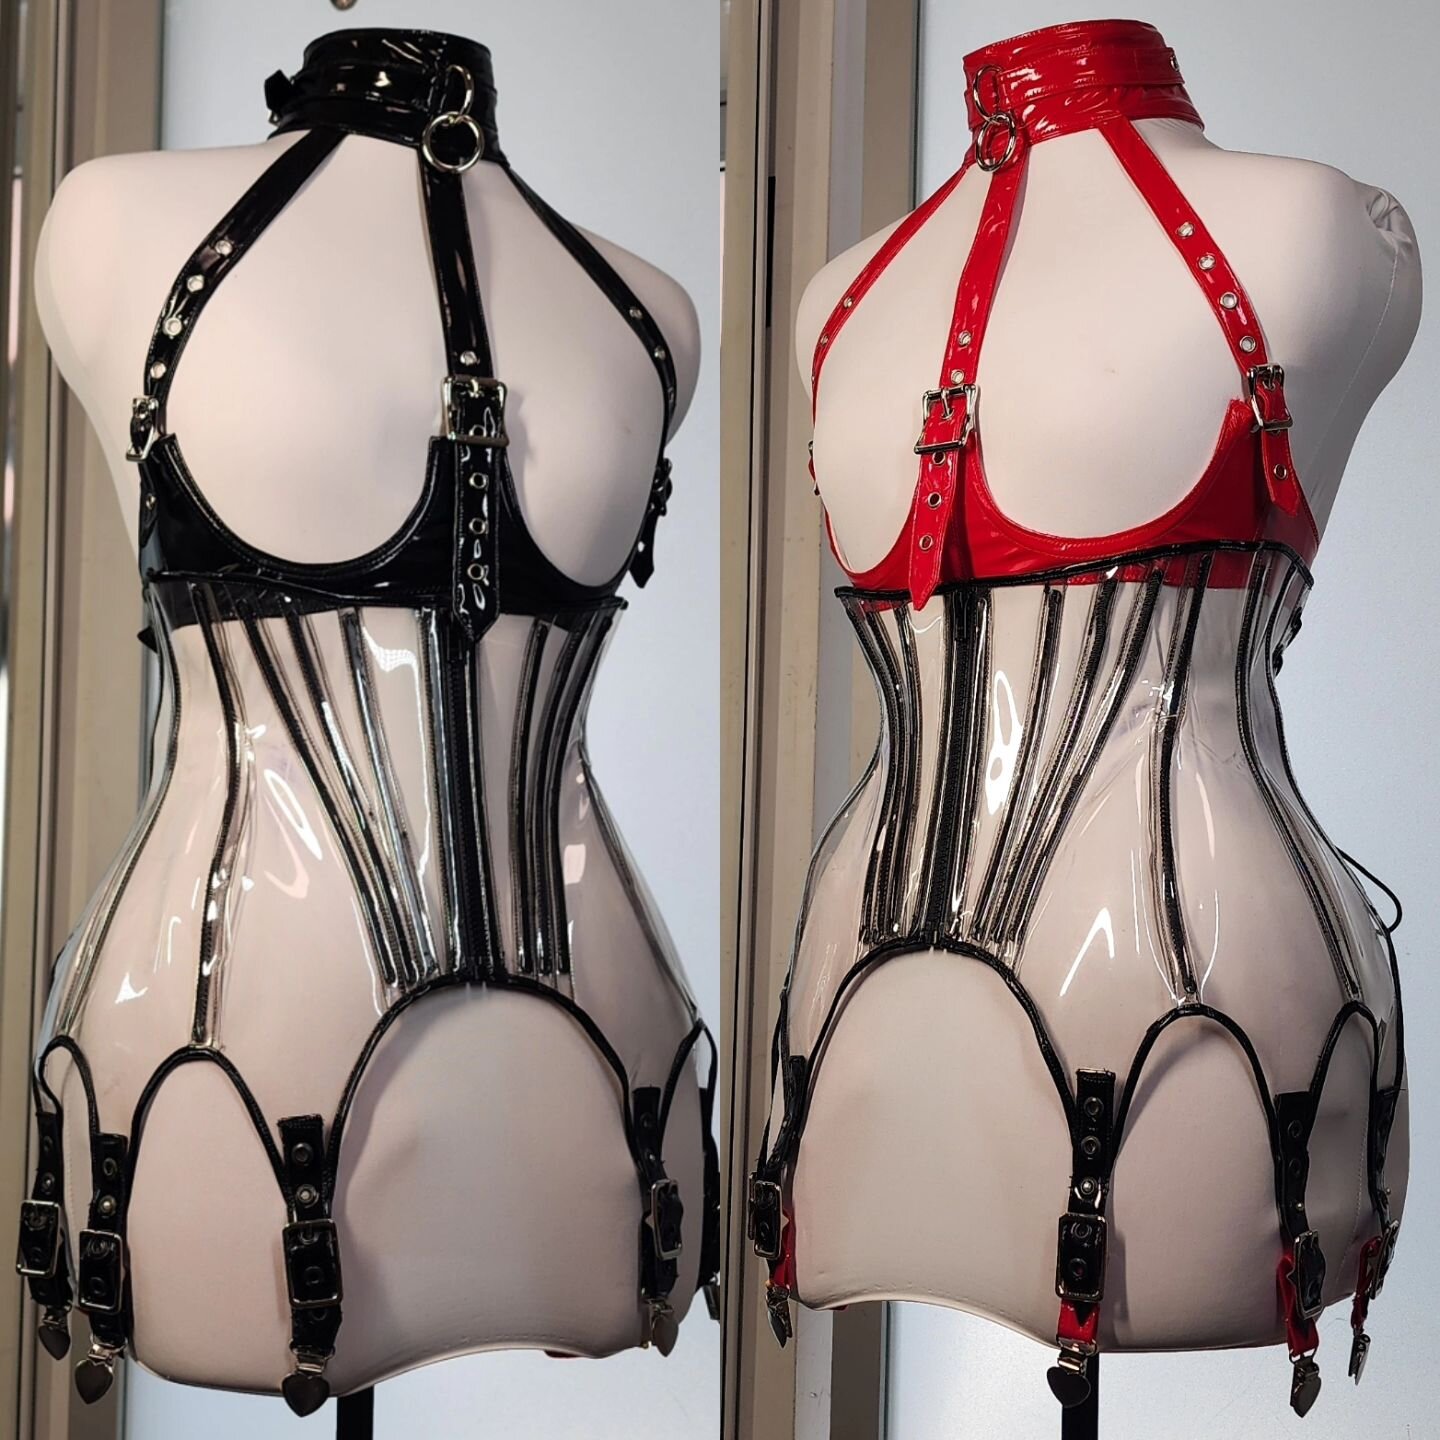 Which shade of classic goth are you?
Custom made-to-size harness cupless bras in black and red, with interchangeable garter clips designed to fit with @artificeclothing 's corset garter belts. 

#gothgoth #fetishfashion #cuplessbra #maketomeasure #pv